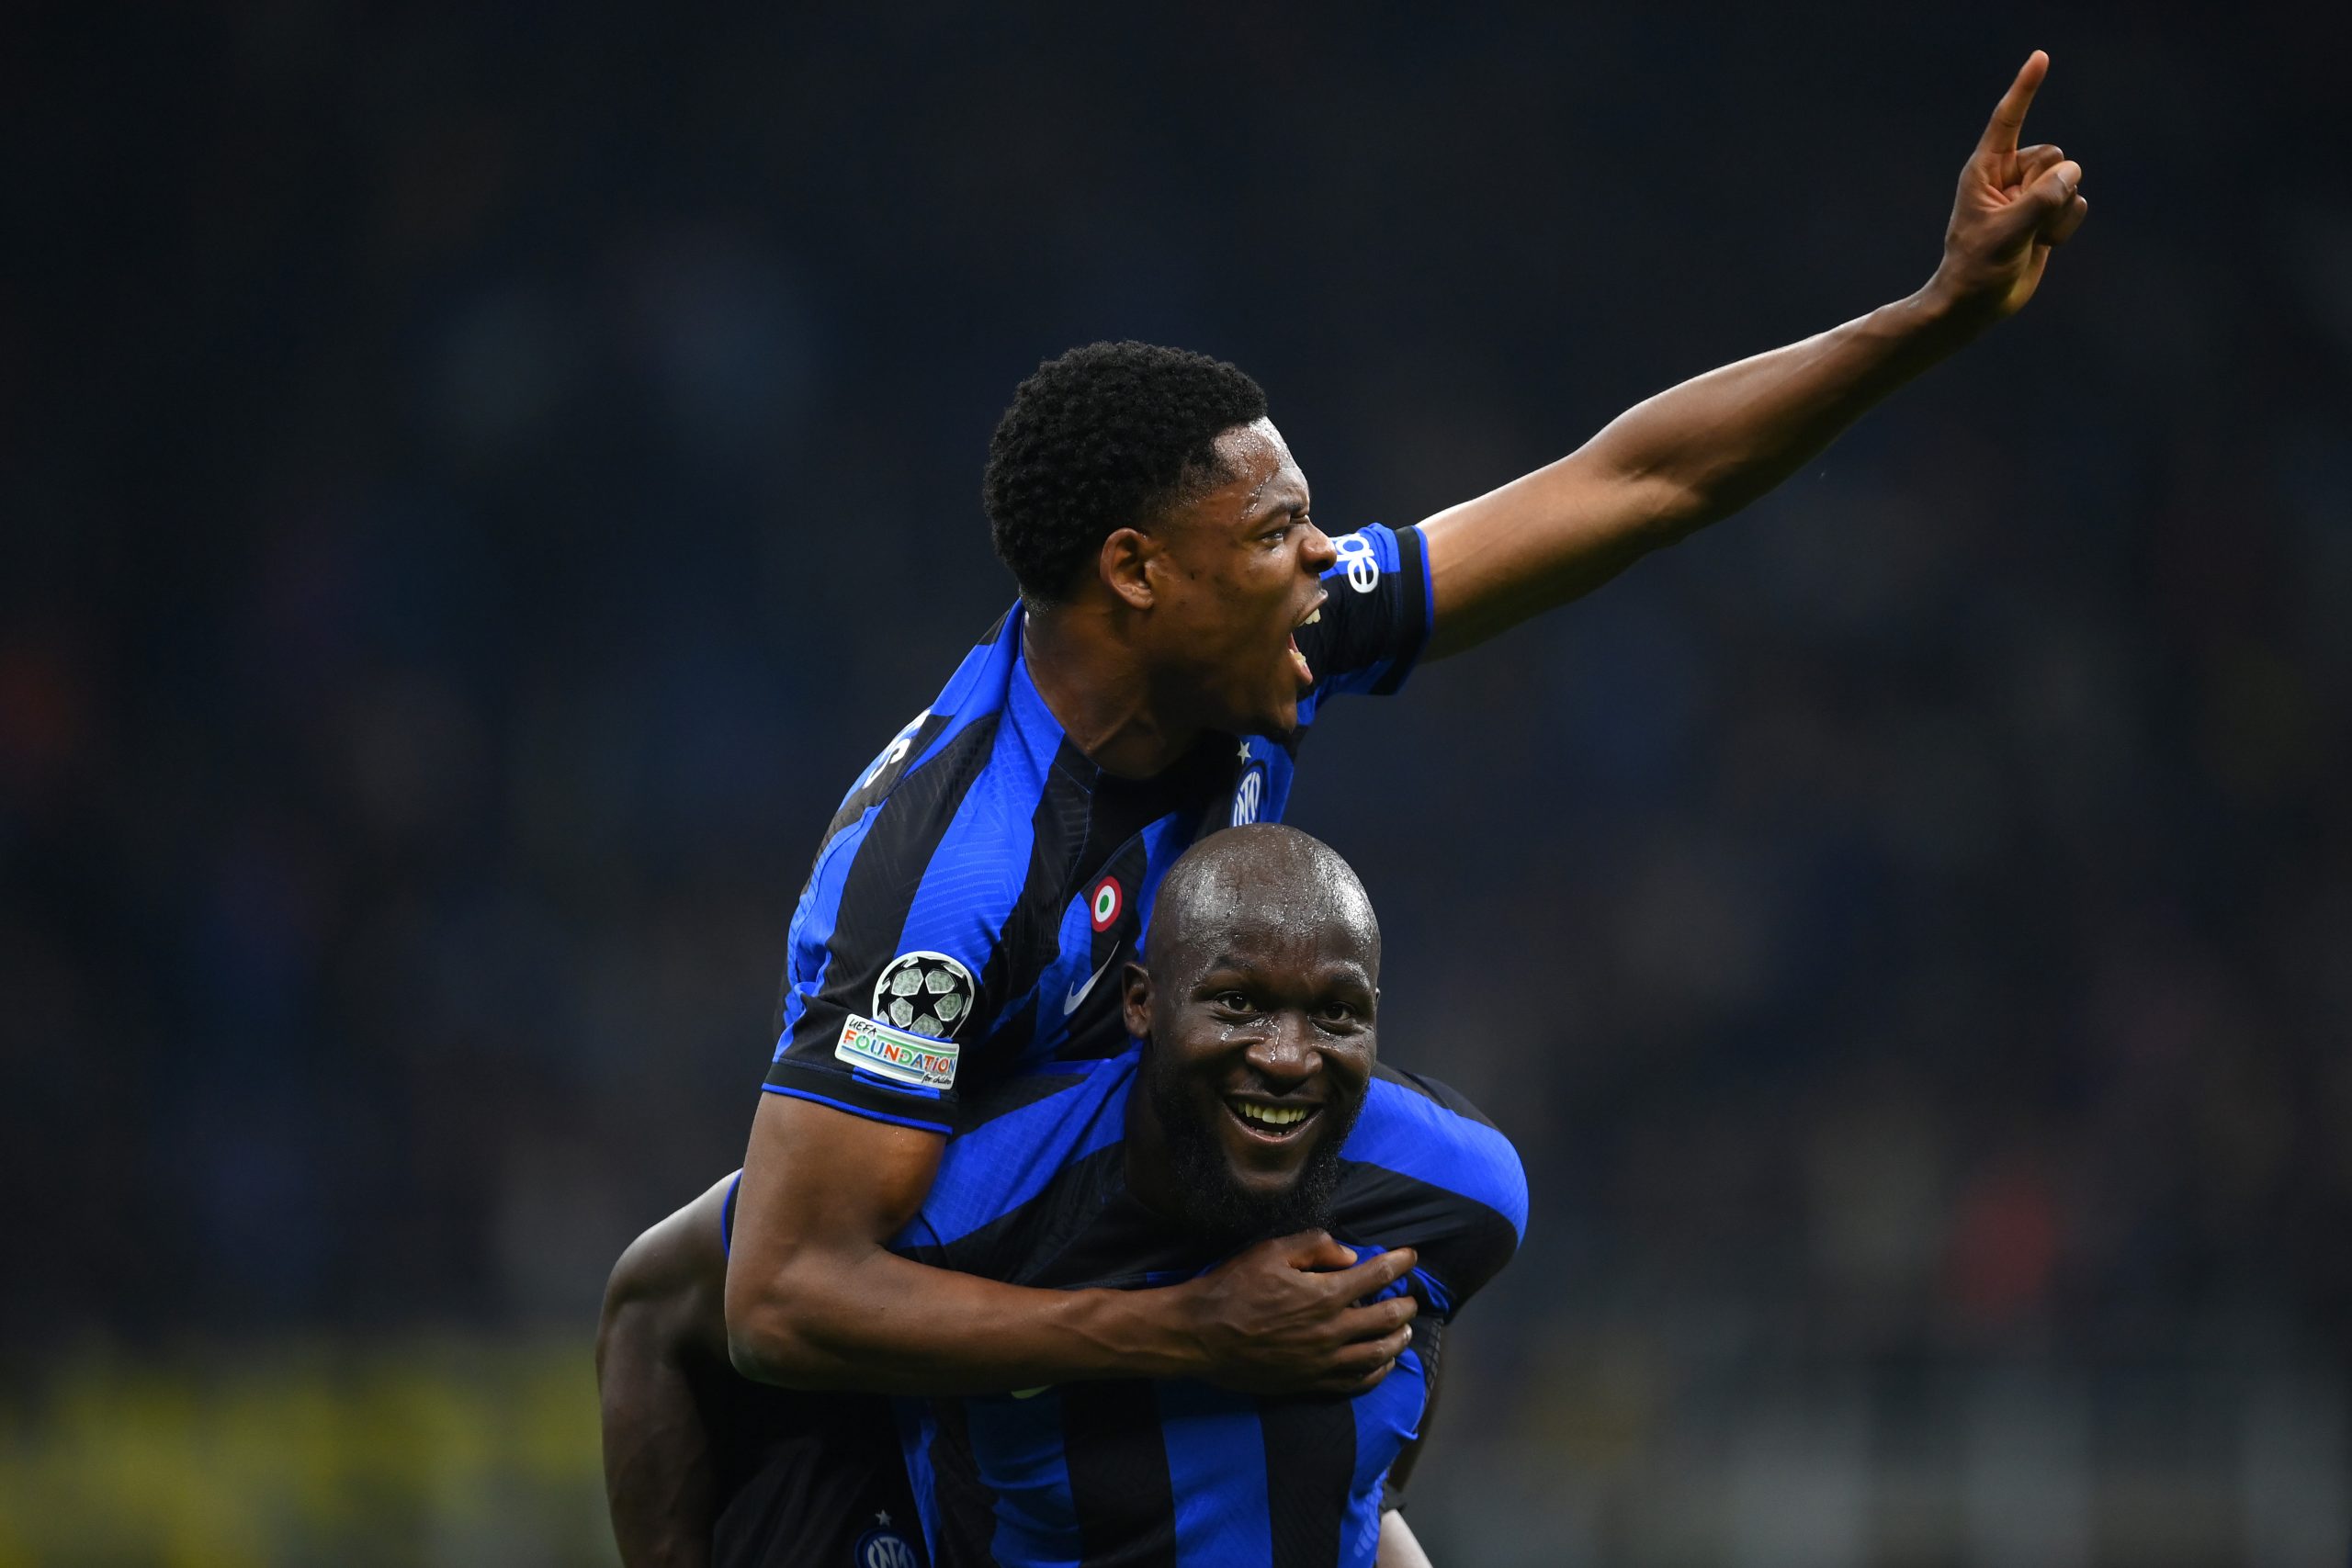 Denzel Dumfries staying at Inter Milan amidst Manchester United interest.